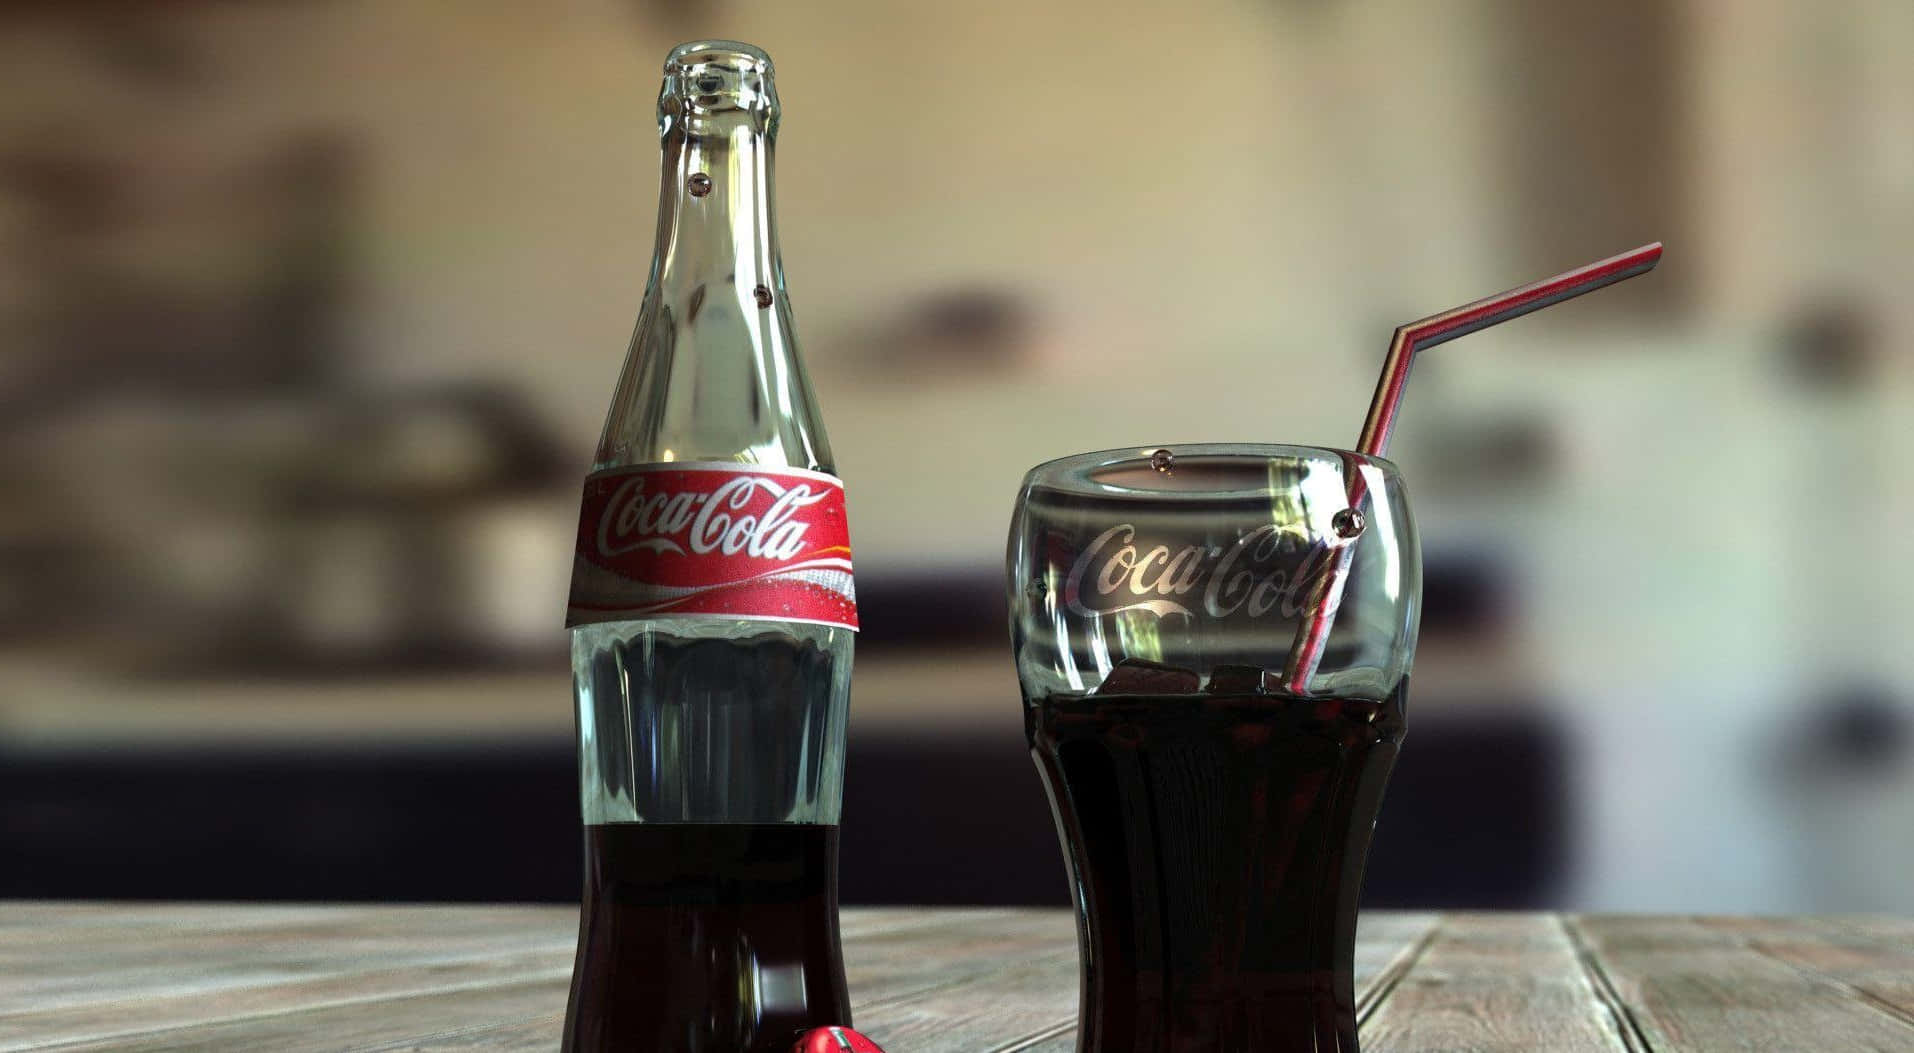 Refreshing fizziness of Coca-Cola in a bottle.